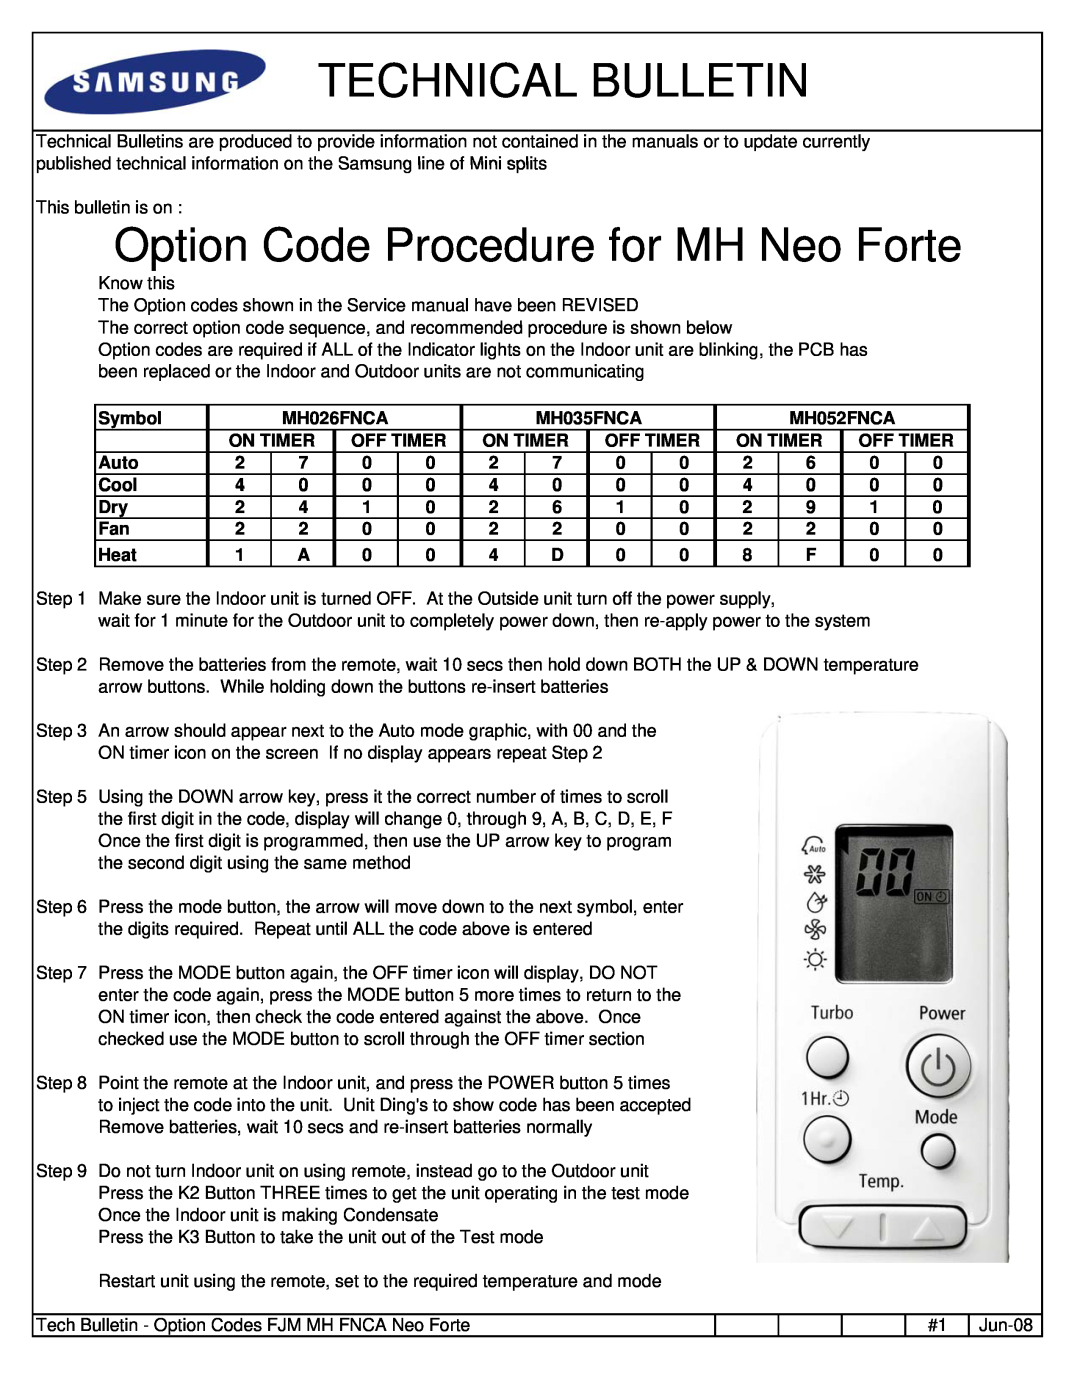 Samsung MH026FNCA service manual Technical Bulletin, Option Code Procedure for MH Neo Forte 